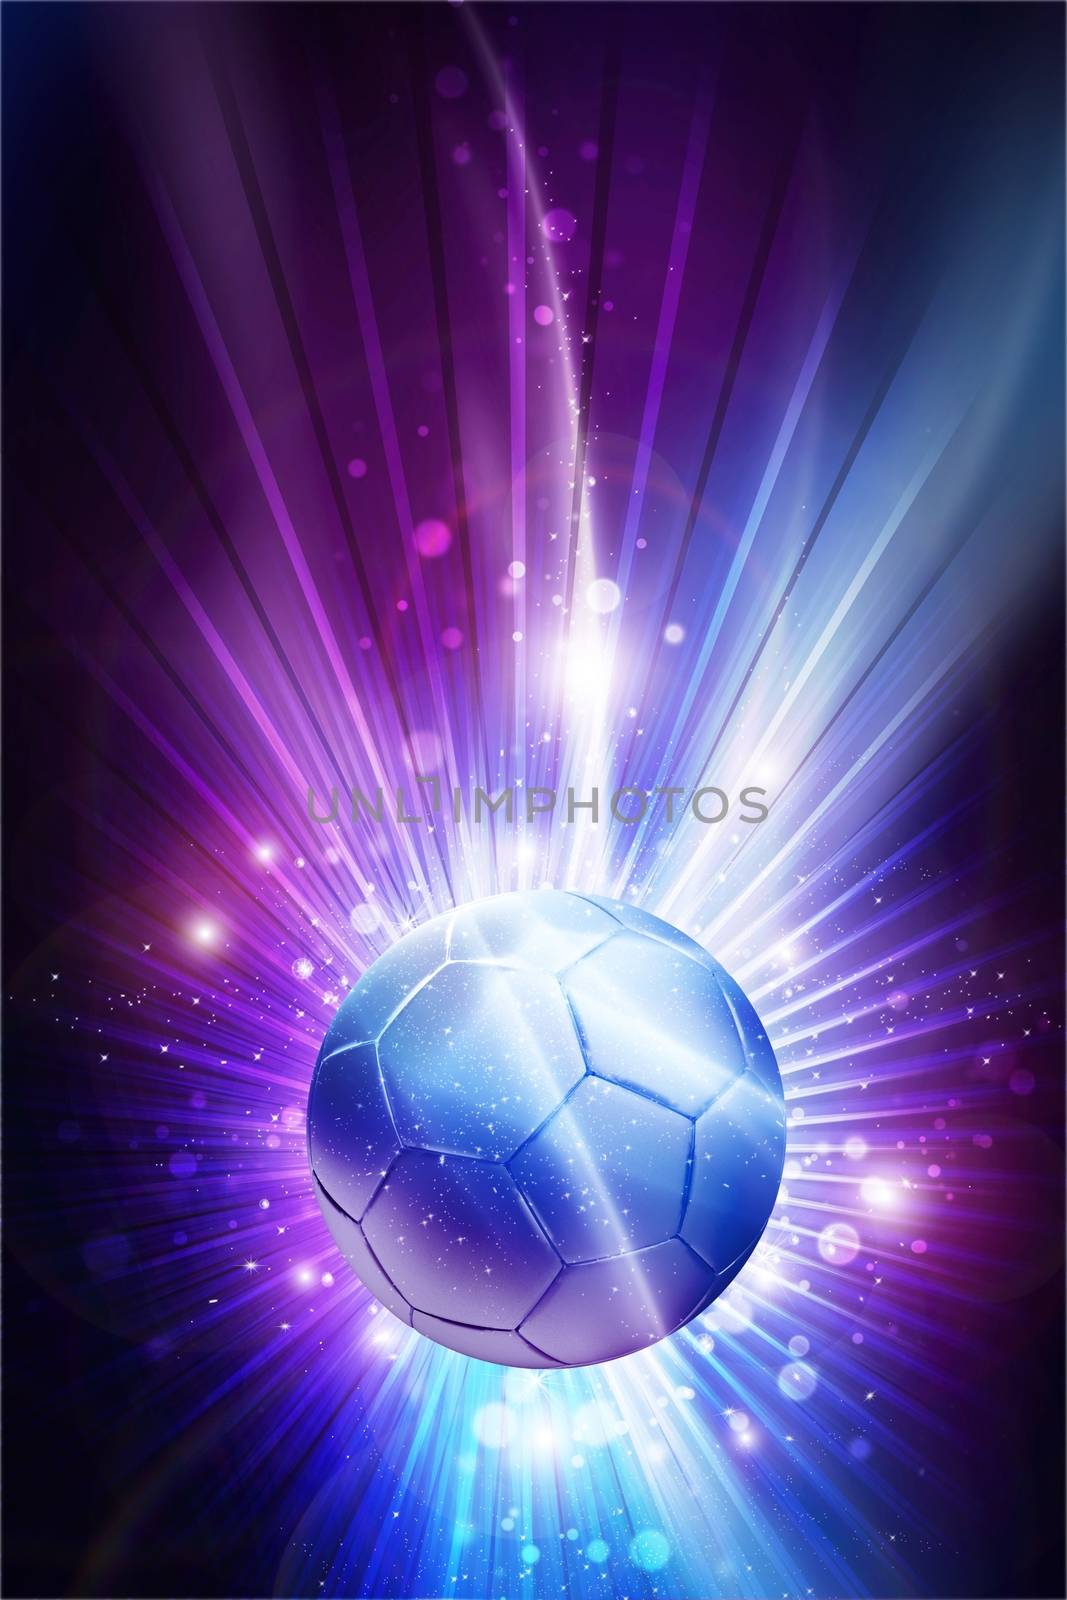 Soccer All Stars - Cool Glowing Stars Soccer Theme Background. Mysterious Purple-Pinky Colors and Soccer Ball in the Center of Shine / Rays. Vertical Design